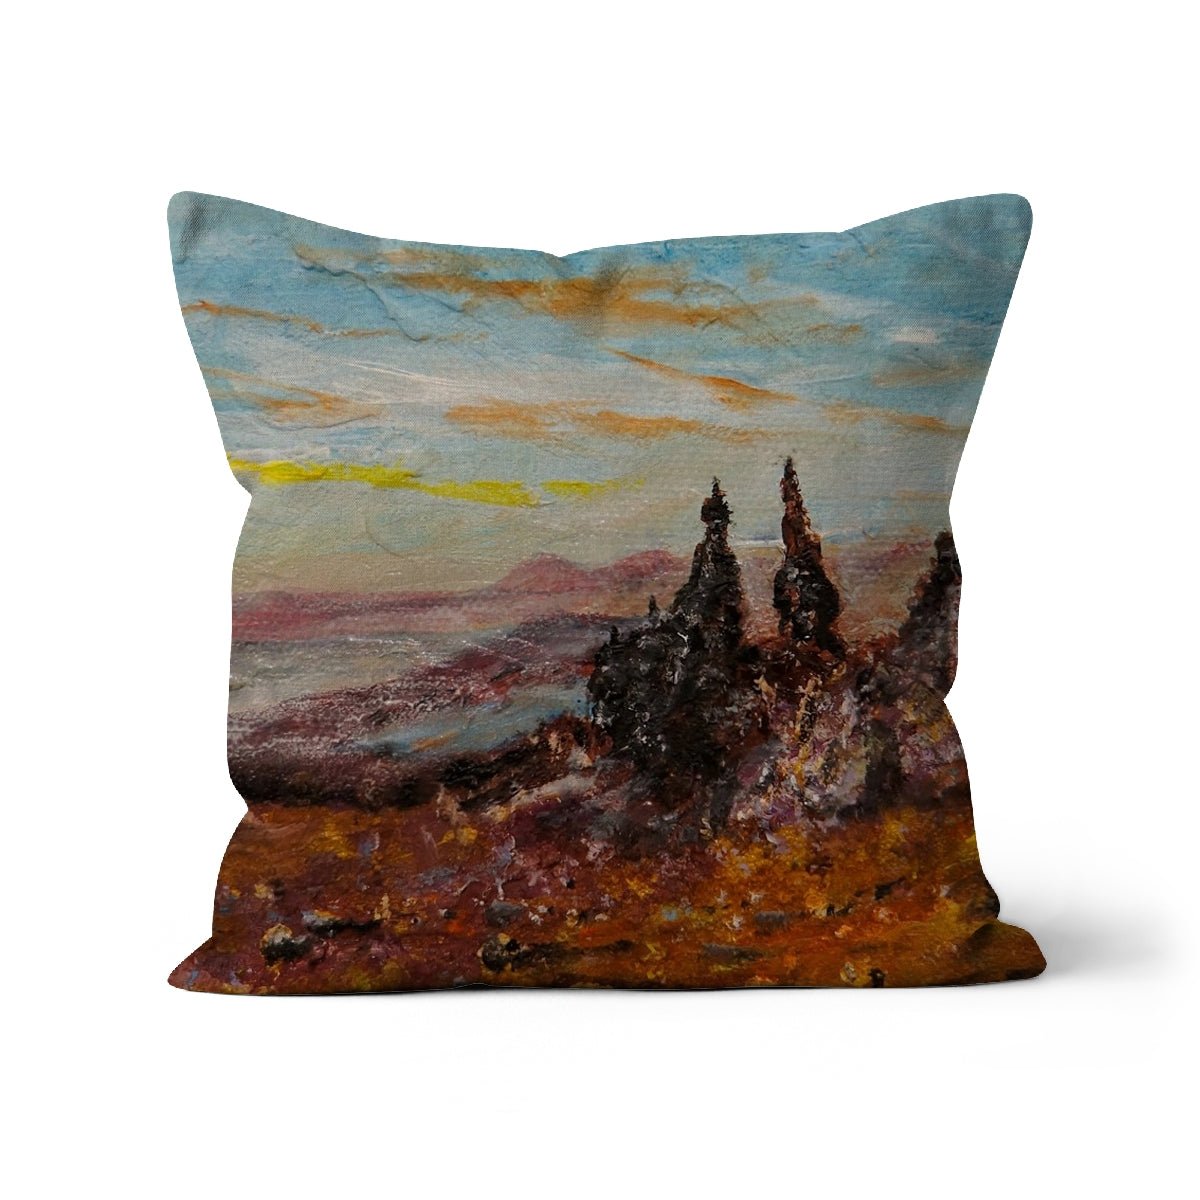 The Old Man Of Storr Skye Art Gifts Cushion-Cushions-Skye Art Gallery-Linen-22"x22"-Paintings, Prints, Homeware, Art Gifts From Scotland By Scottish Artist Kevin Hunter